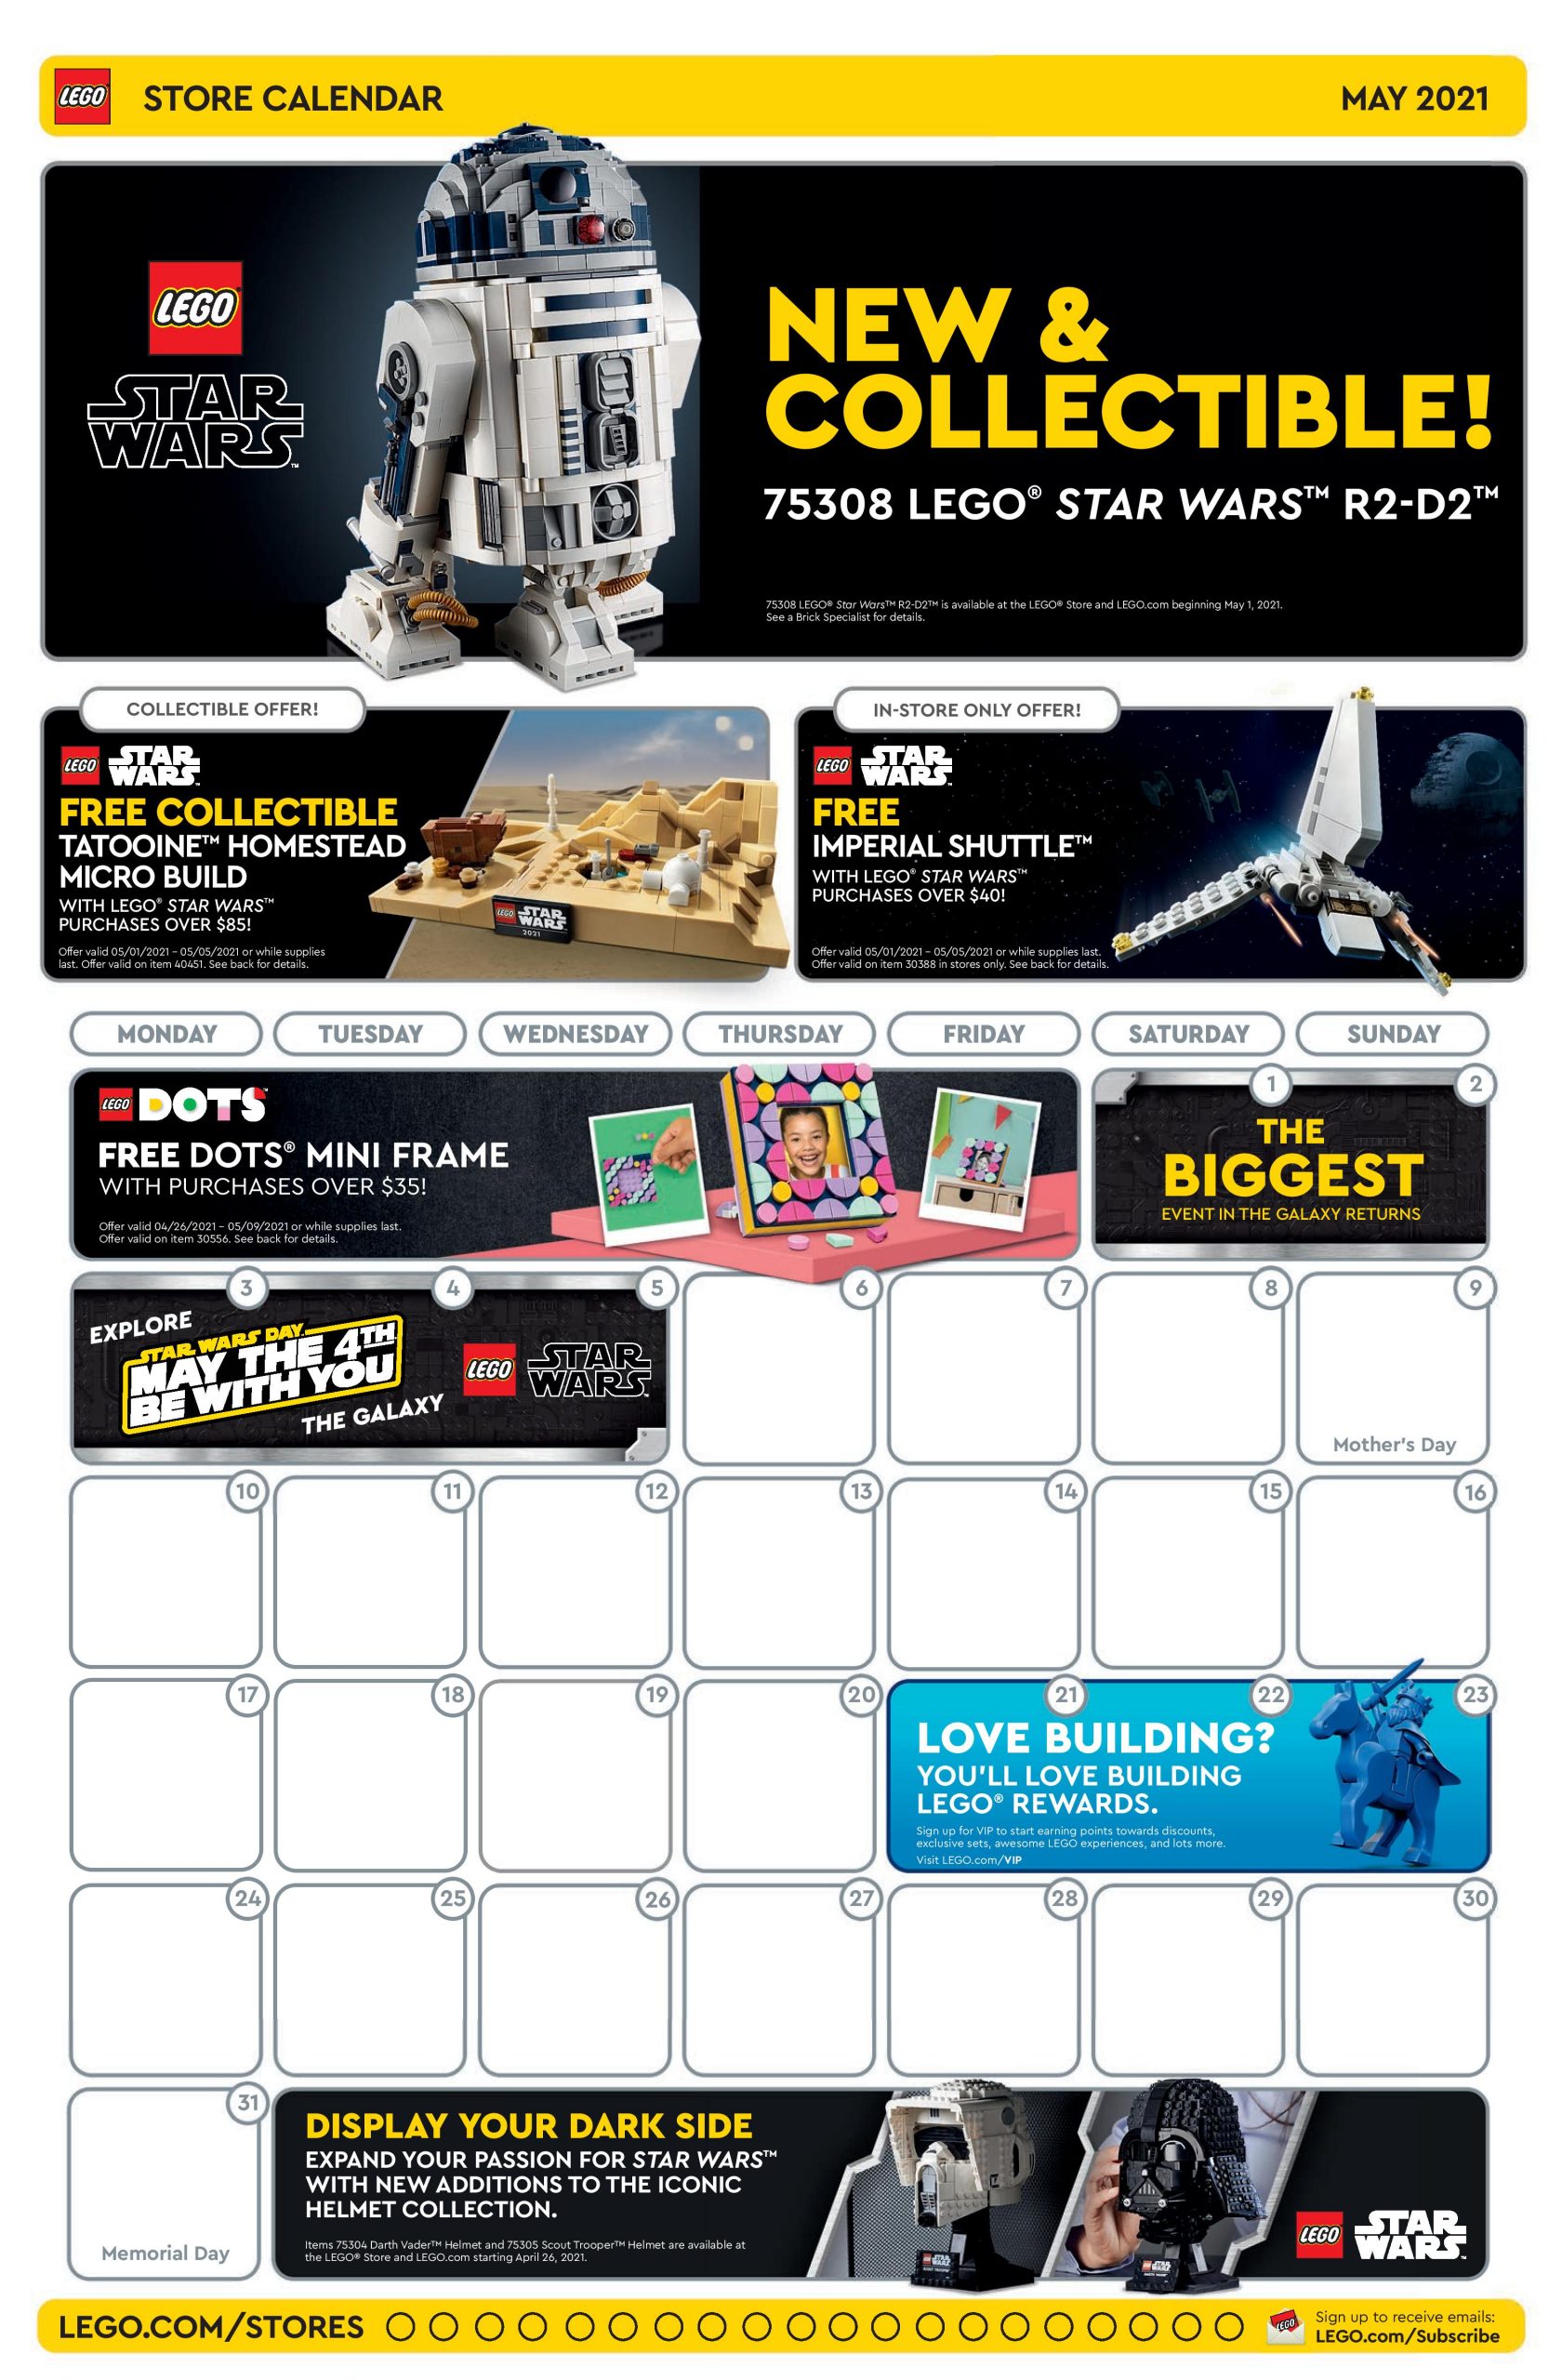 May 2022 Lego Calendar Lego May 2021 Store Calendar Promotions & Events - The Brick Fan